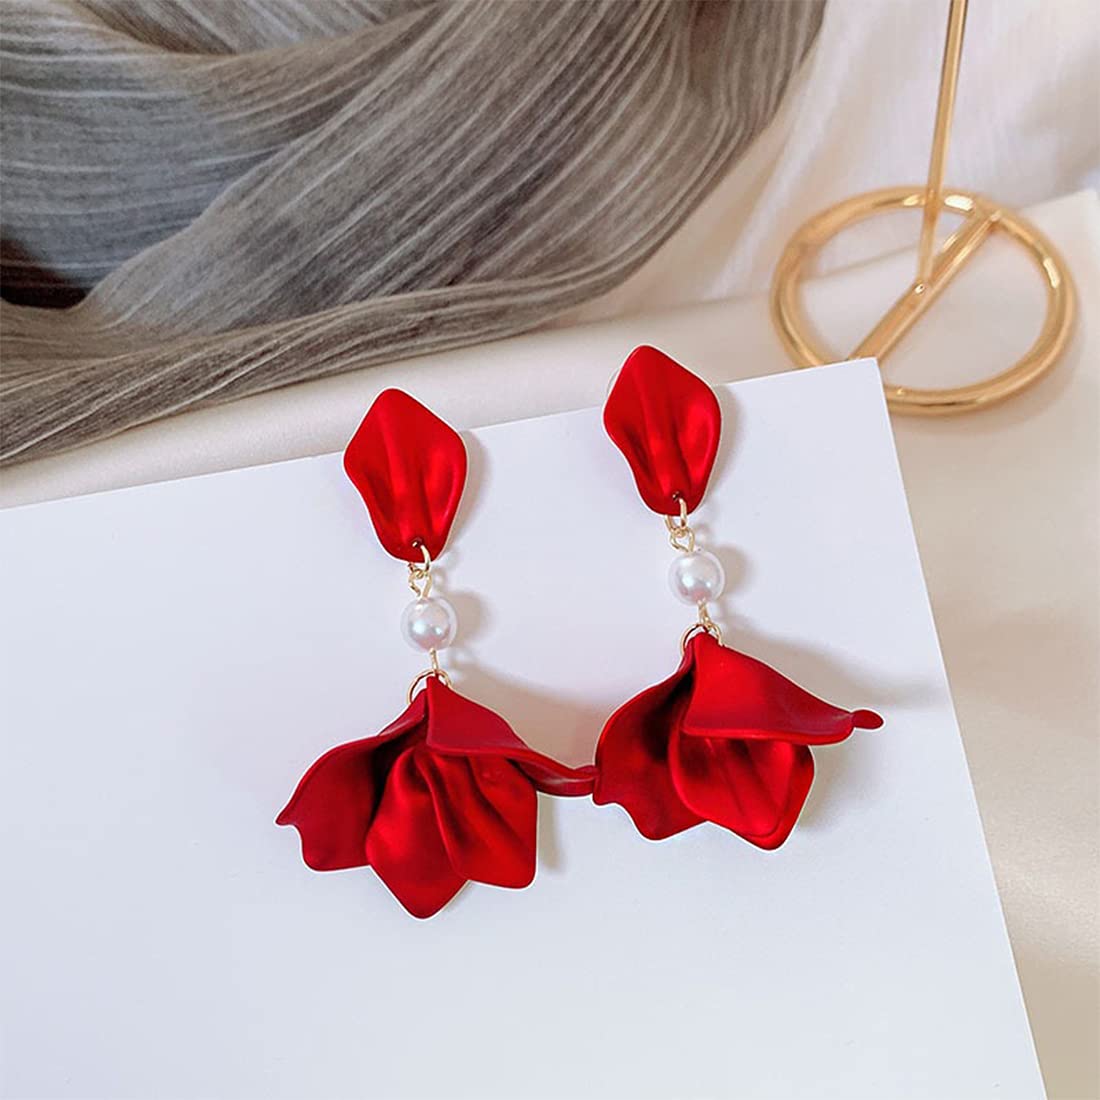 Yellow Chimes Floral Earrings for Women Gold Plated Metallic Red Colour Floral Petals Pearl Drop Earrings for Women and Girls